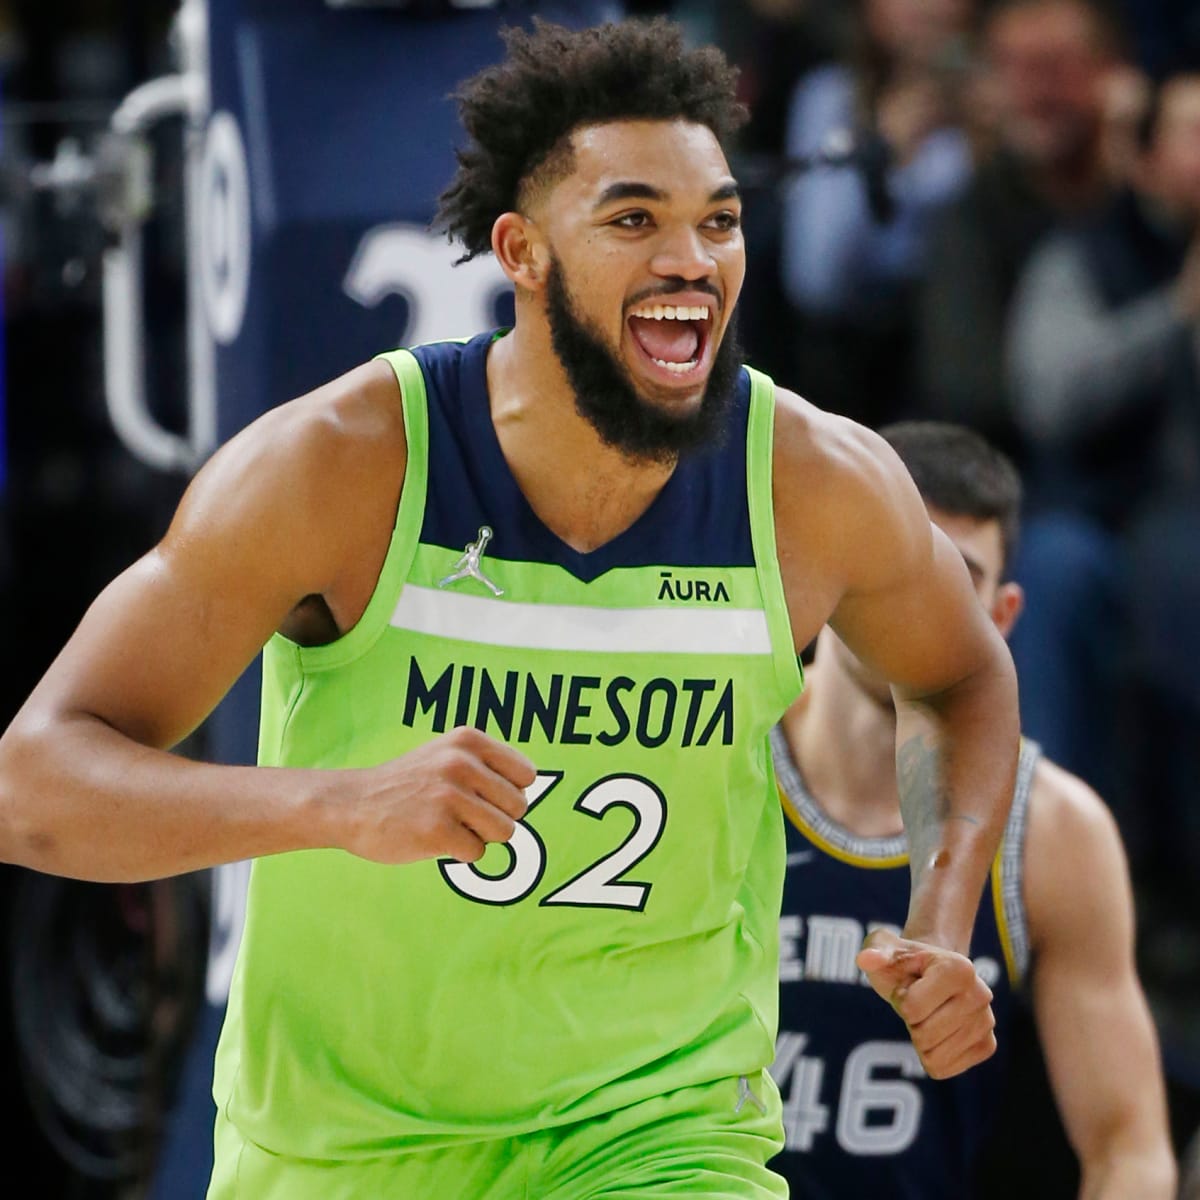 Karl-Anthony Towns signing super-max contract extension with